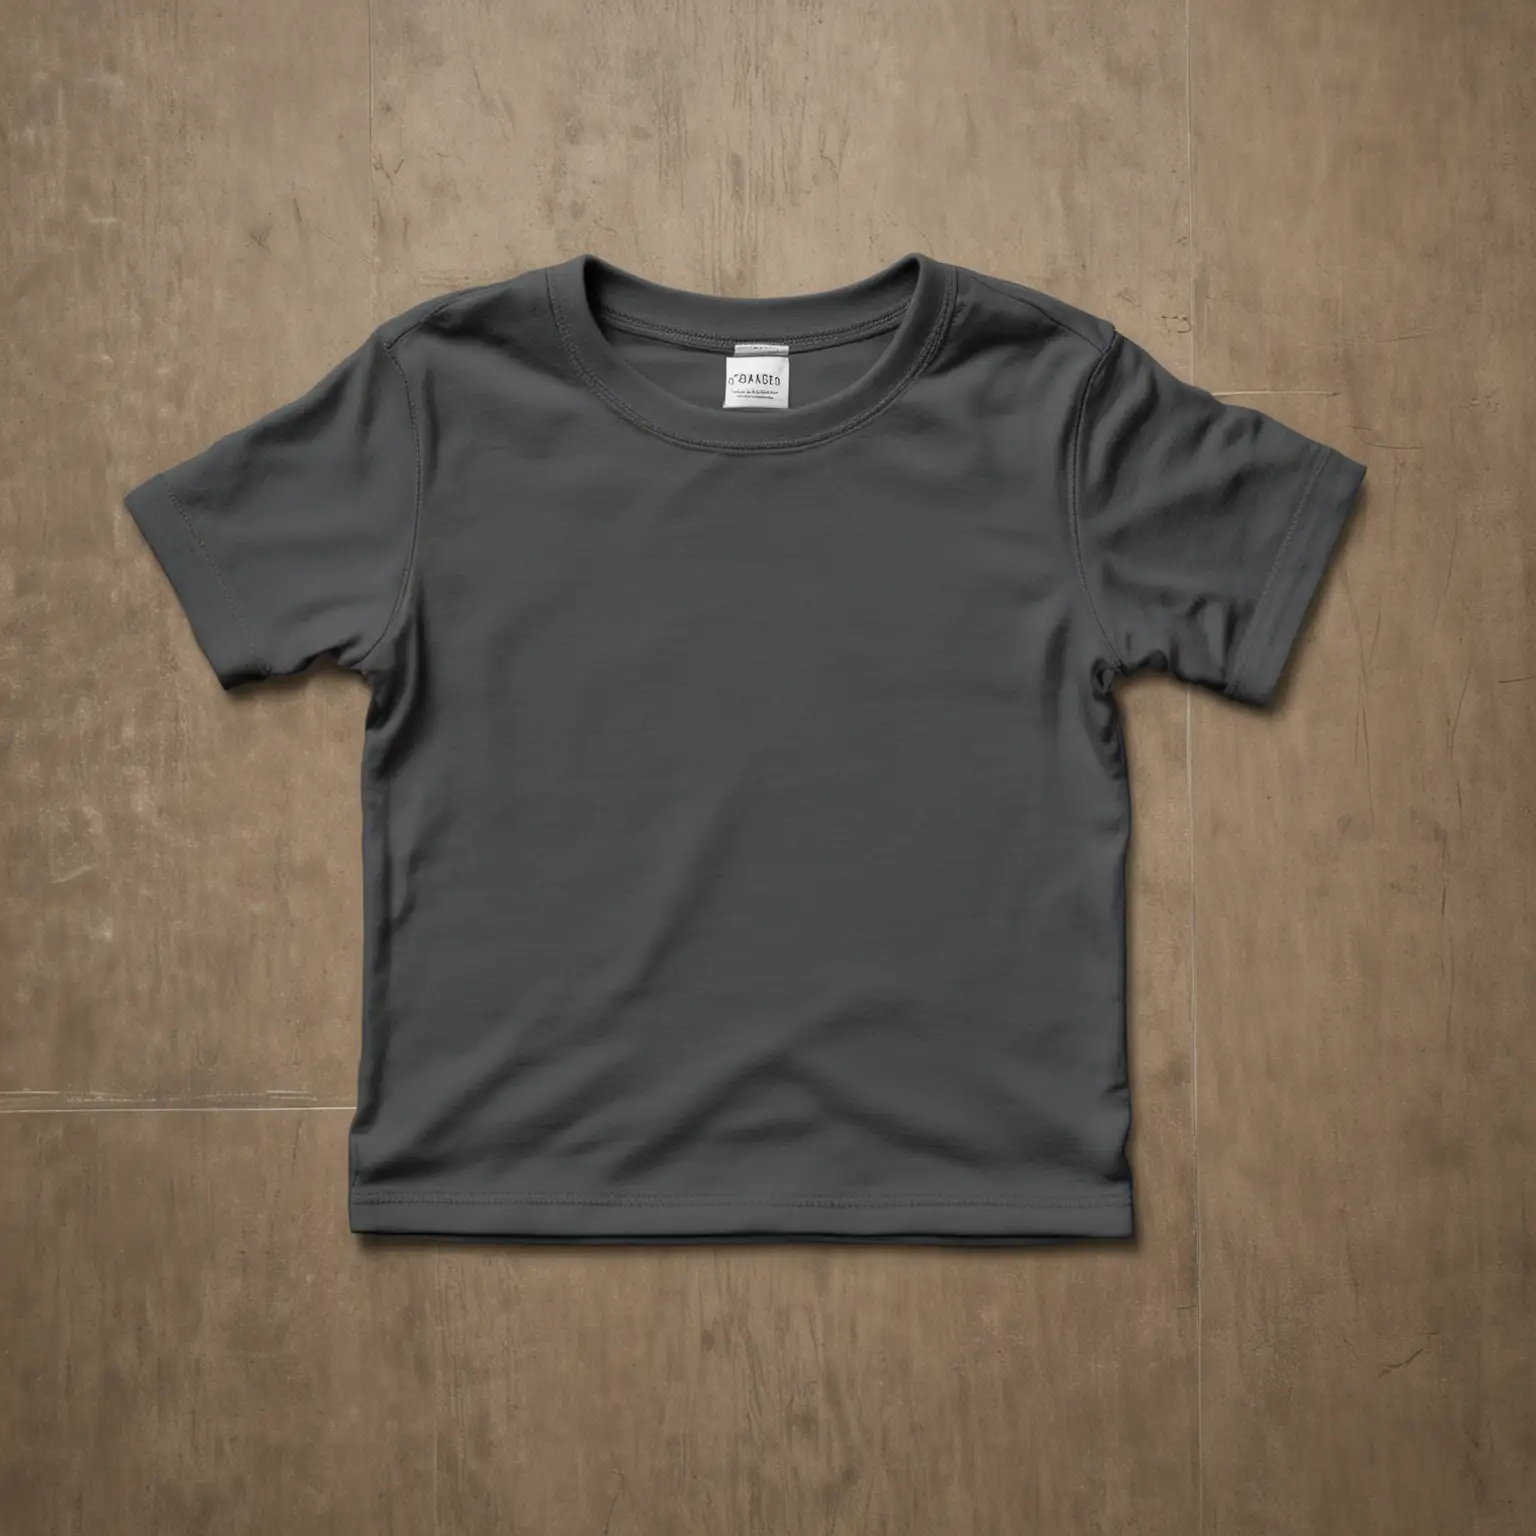 HYPER REALISTIC ironed simmetrical proportional 100% cotton dark grey gildan 5000B toddler tshirt, baby tee no wrinkles, lied on floor seen from above with solid contrasting background floor